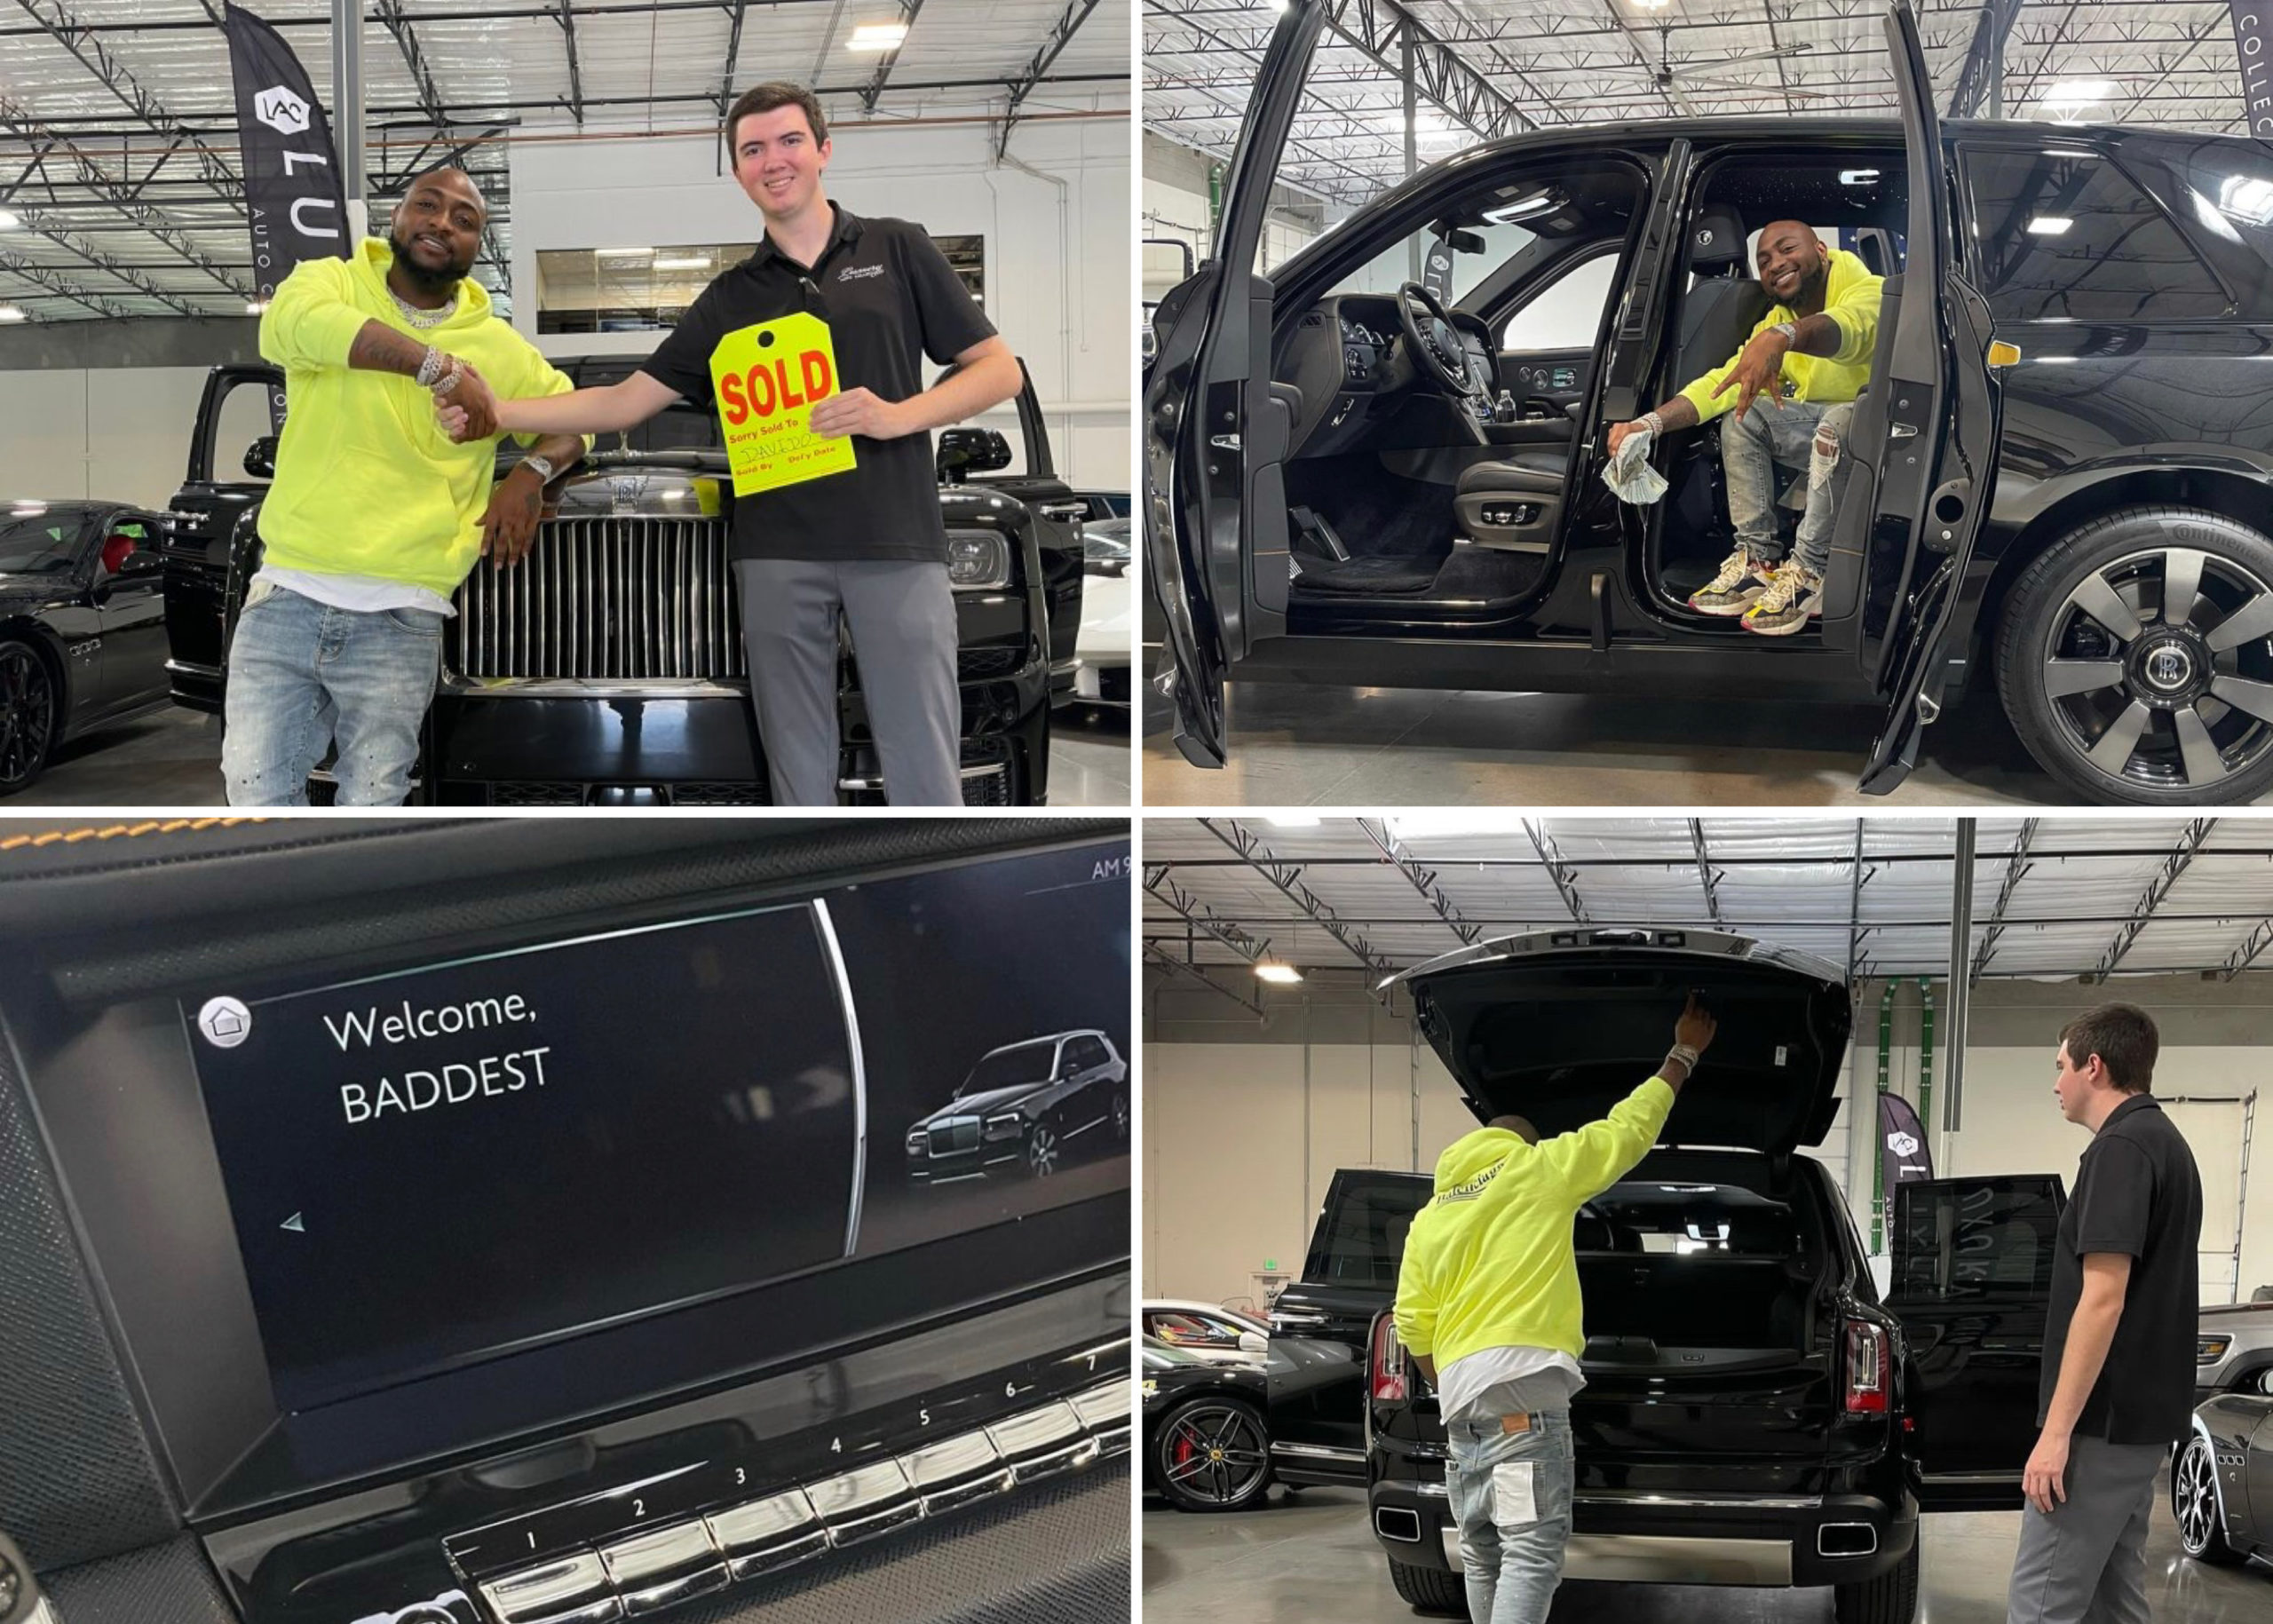 Davido Acquires 2021 Rolls Royce Cullinan Worth About $500,000